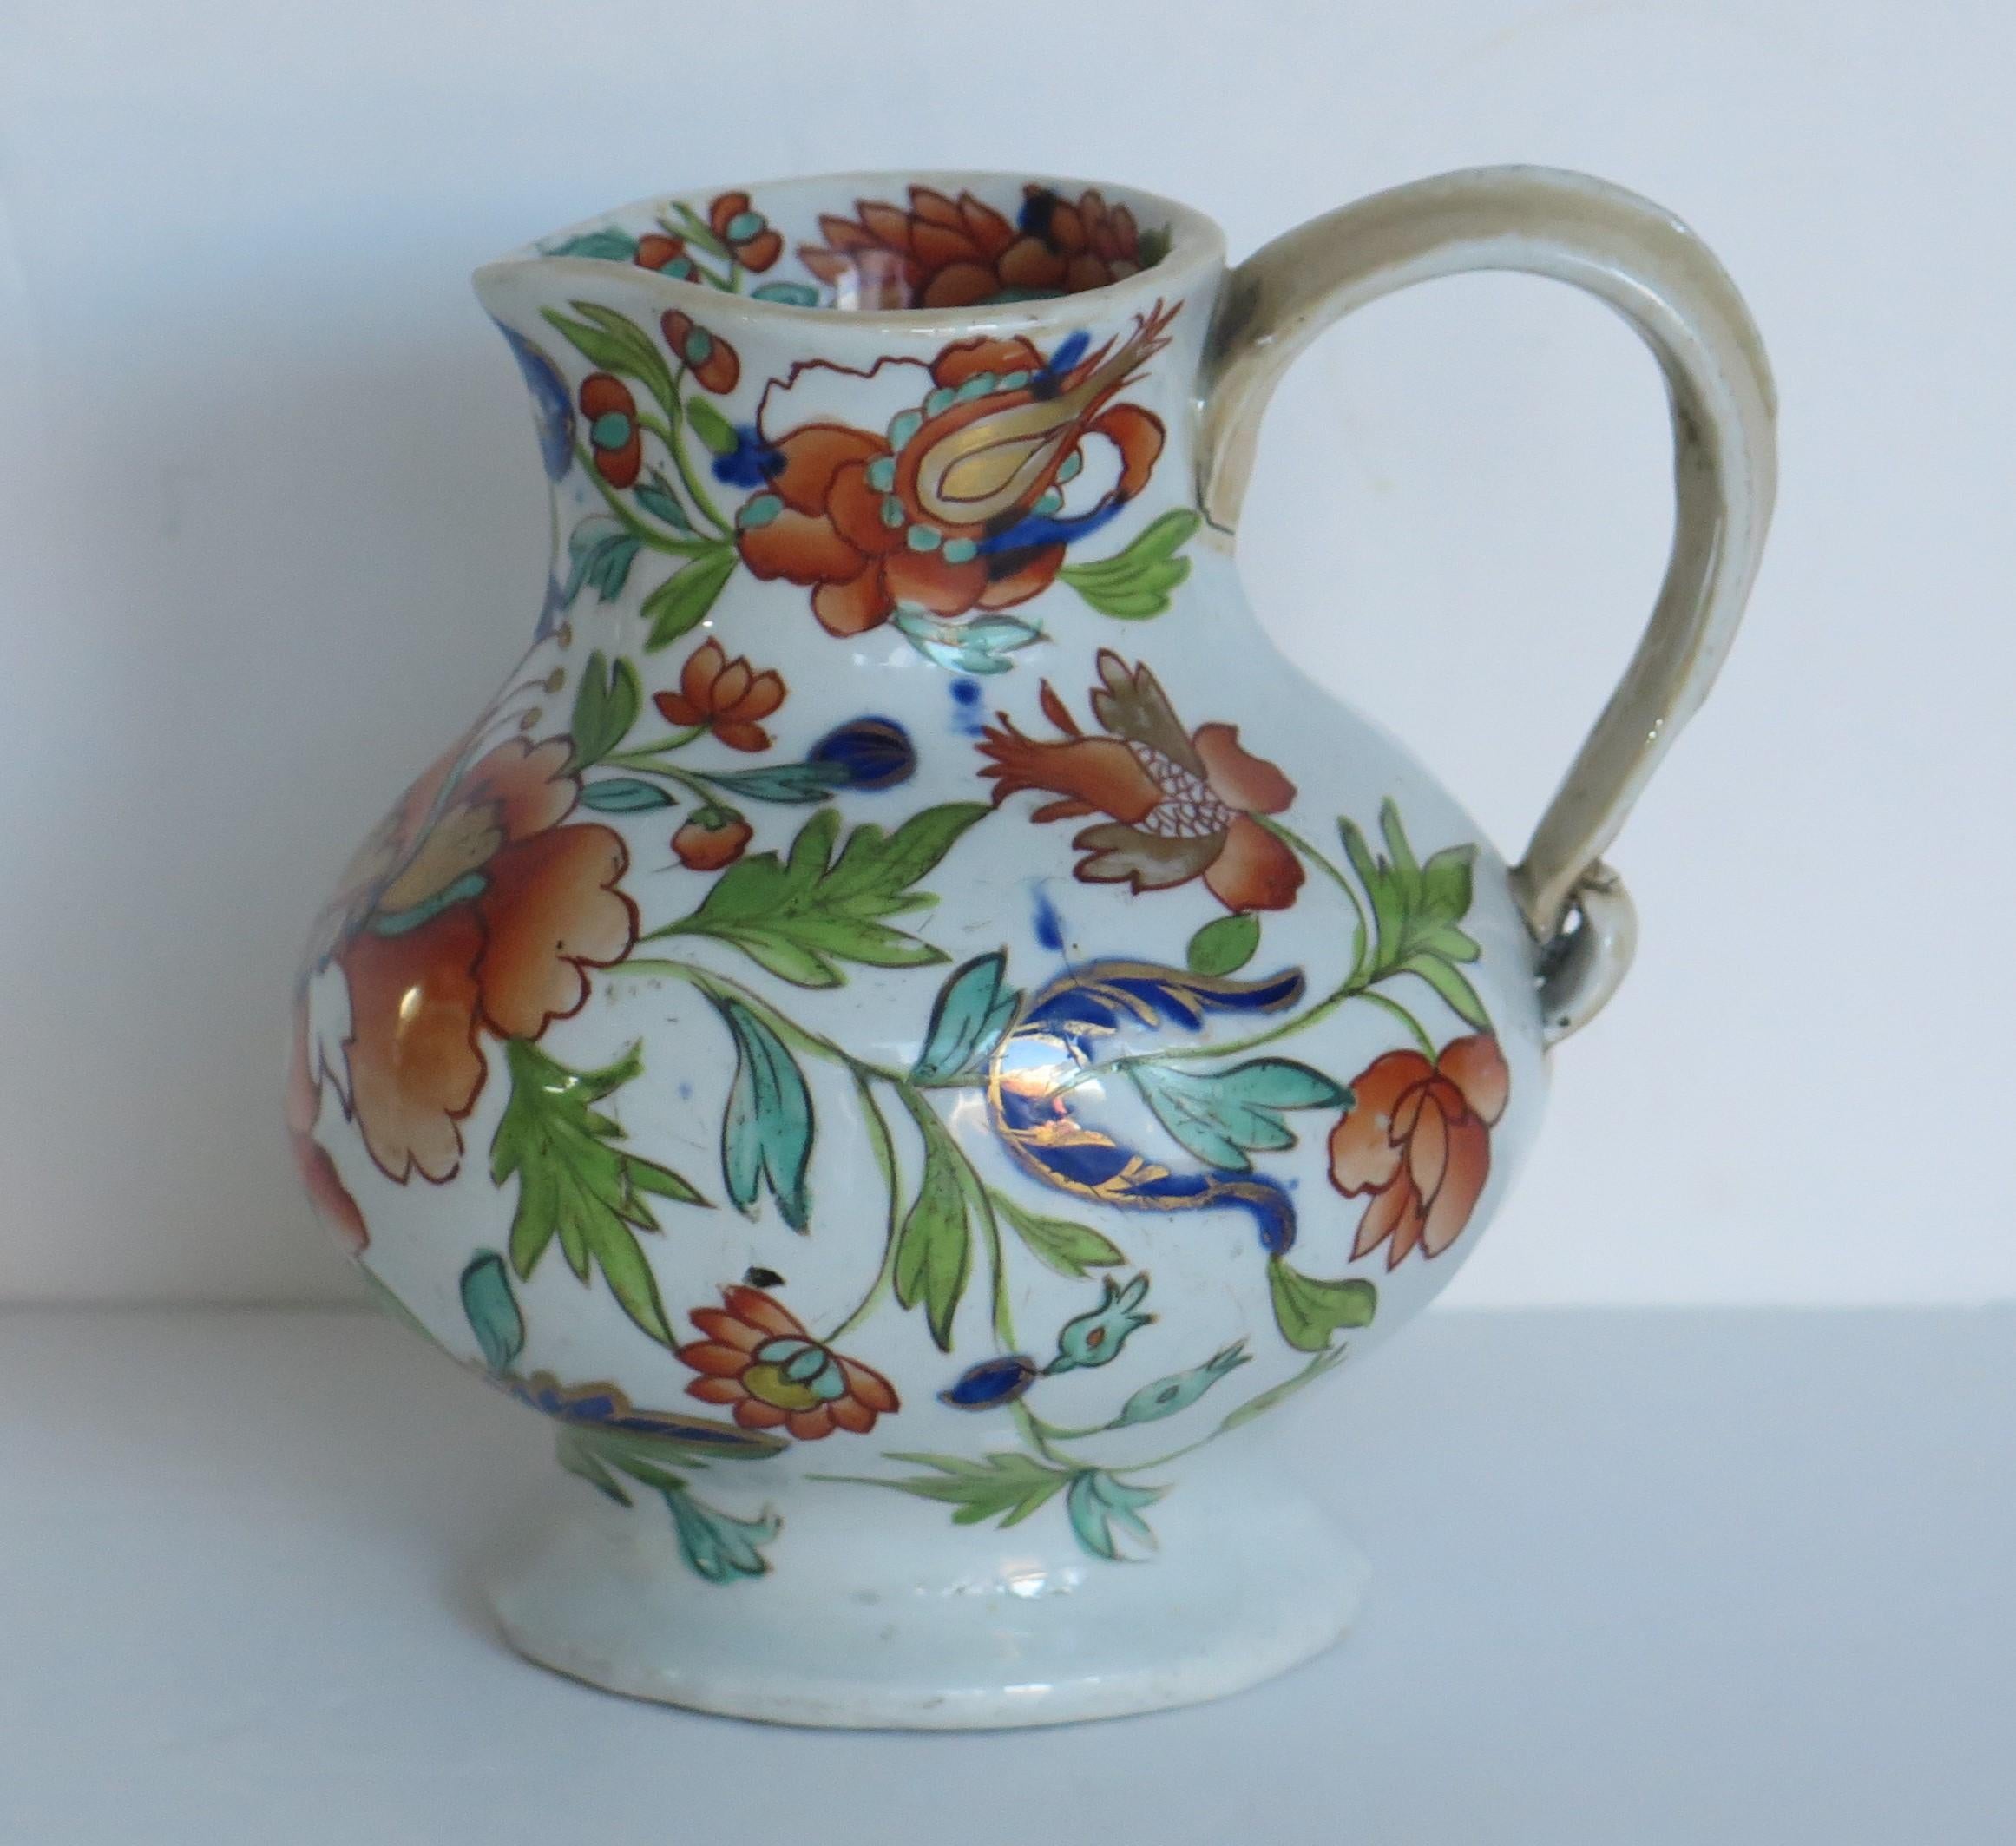 This is a rare very early Cream Jug in a rare shape, hand painted in the large stamen flower pattern, made by Mason's Ironstone, Lane Delph, England and dating to circa 1813-1820.

The pattern is hand painted with typical bold free flowing enamels